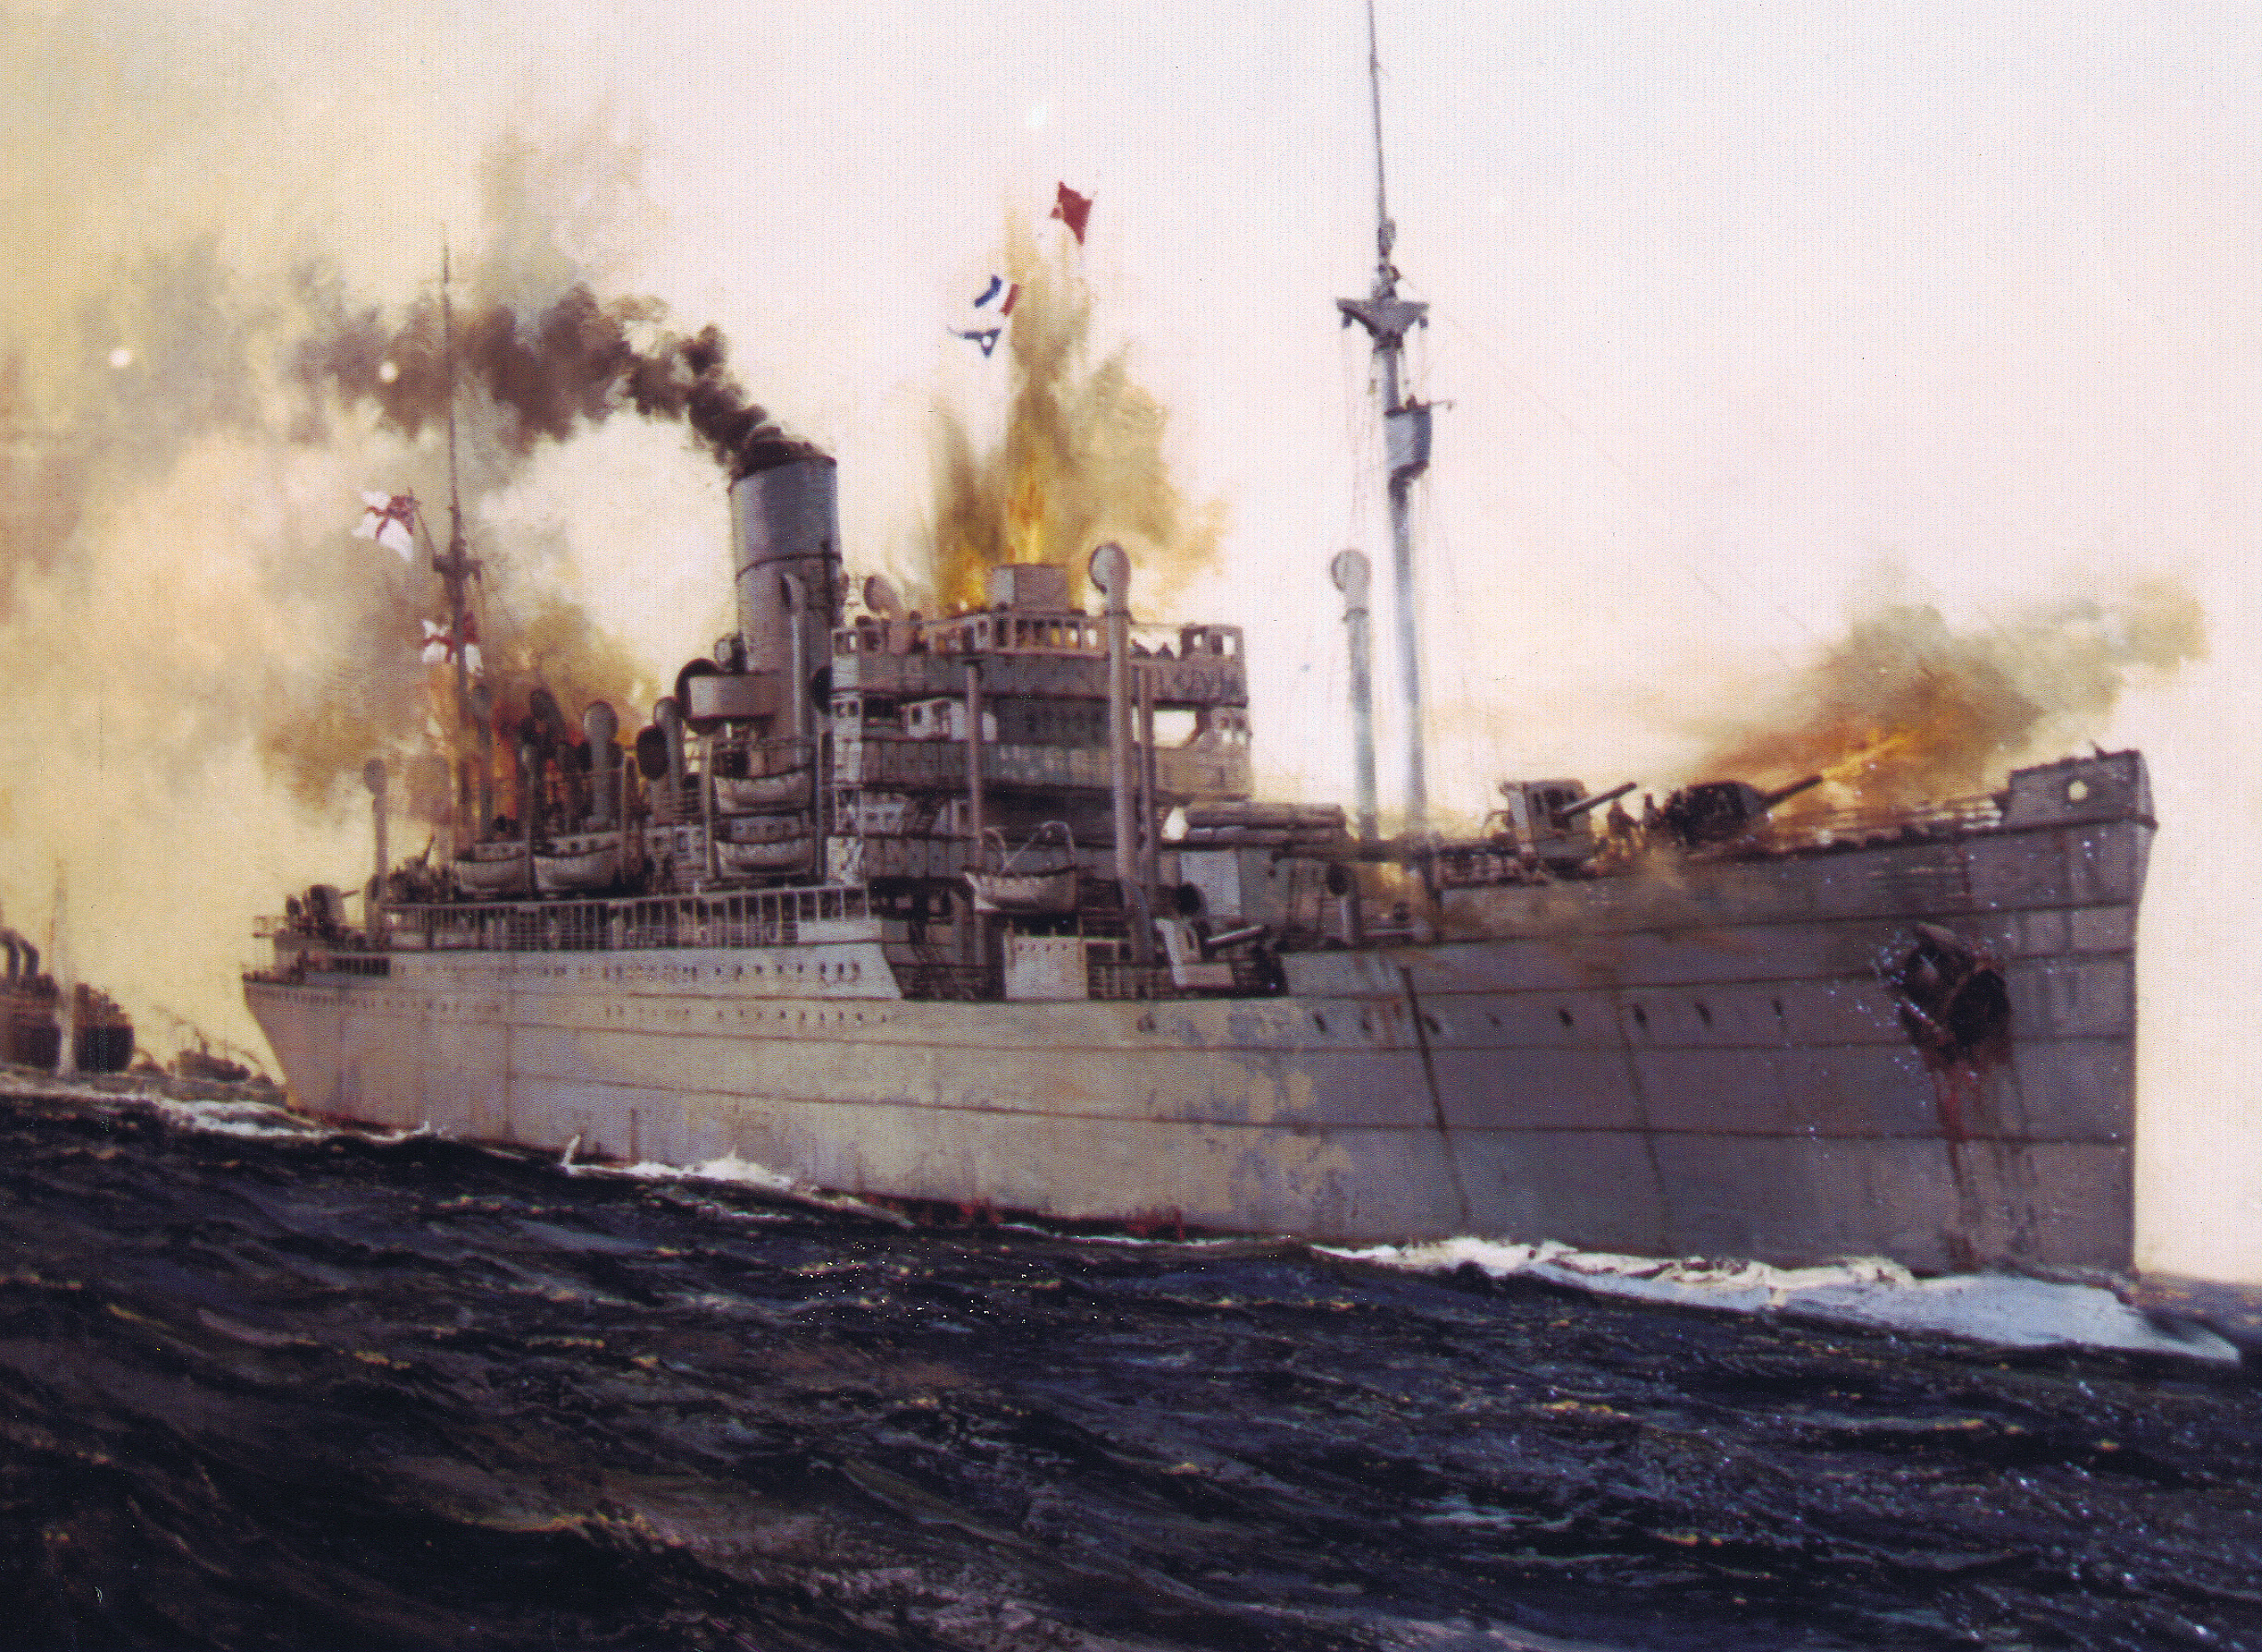 The Jervis Bay steams through the water in this painting of its engagement with the Admiral Scheer. Though she put up a fight, she would eventually succumb to the firepower of the Scheer.